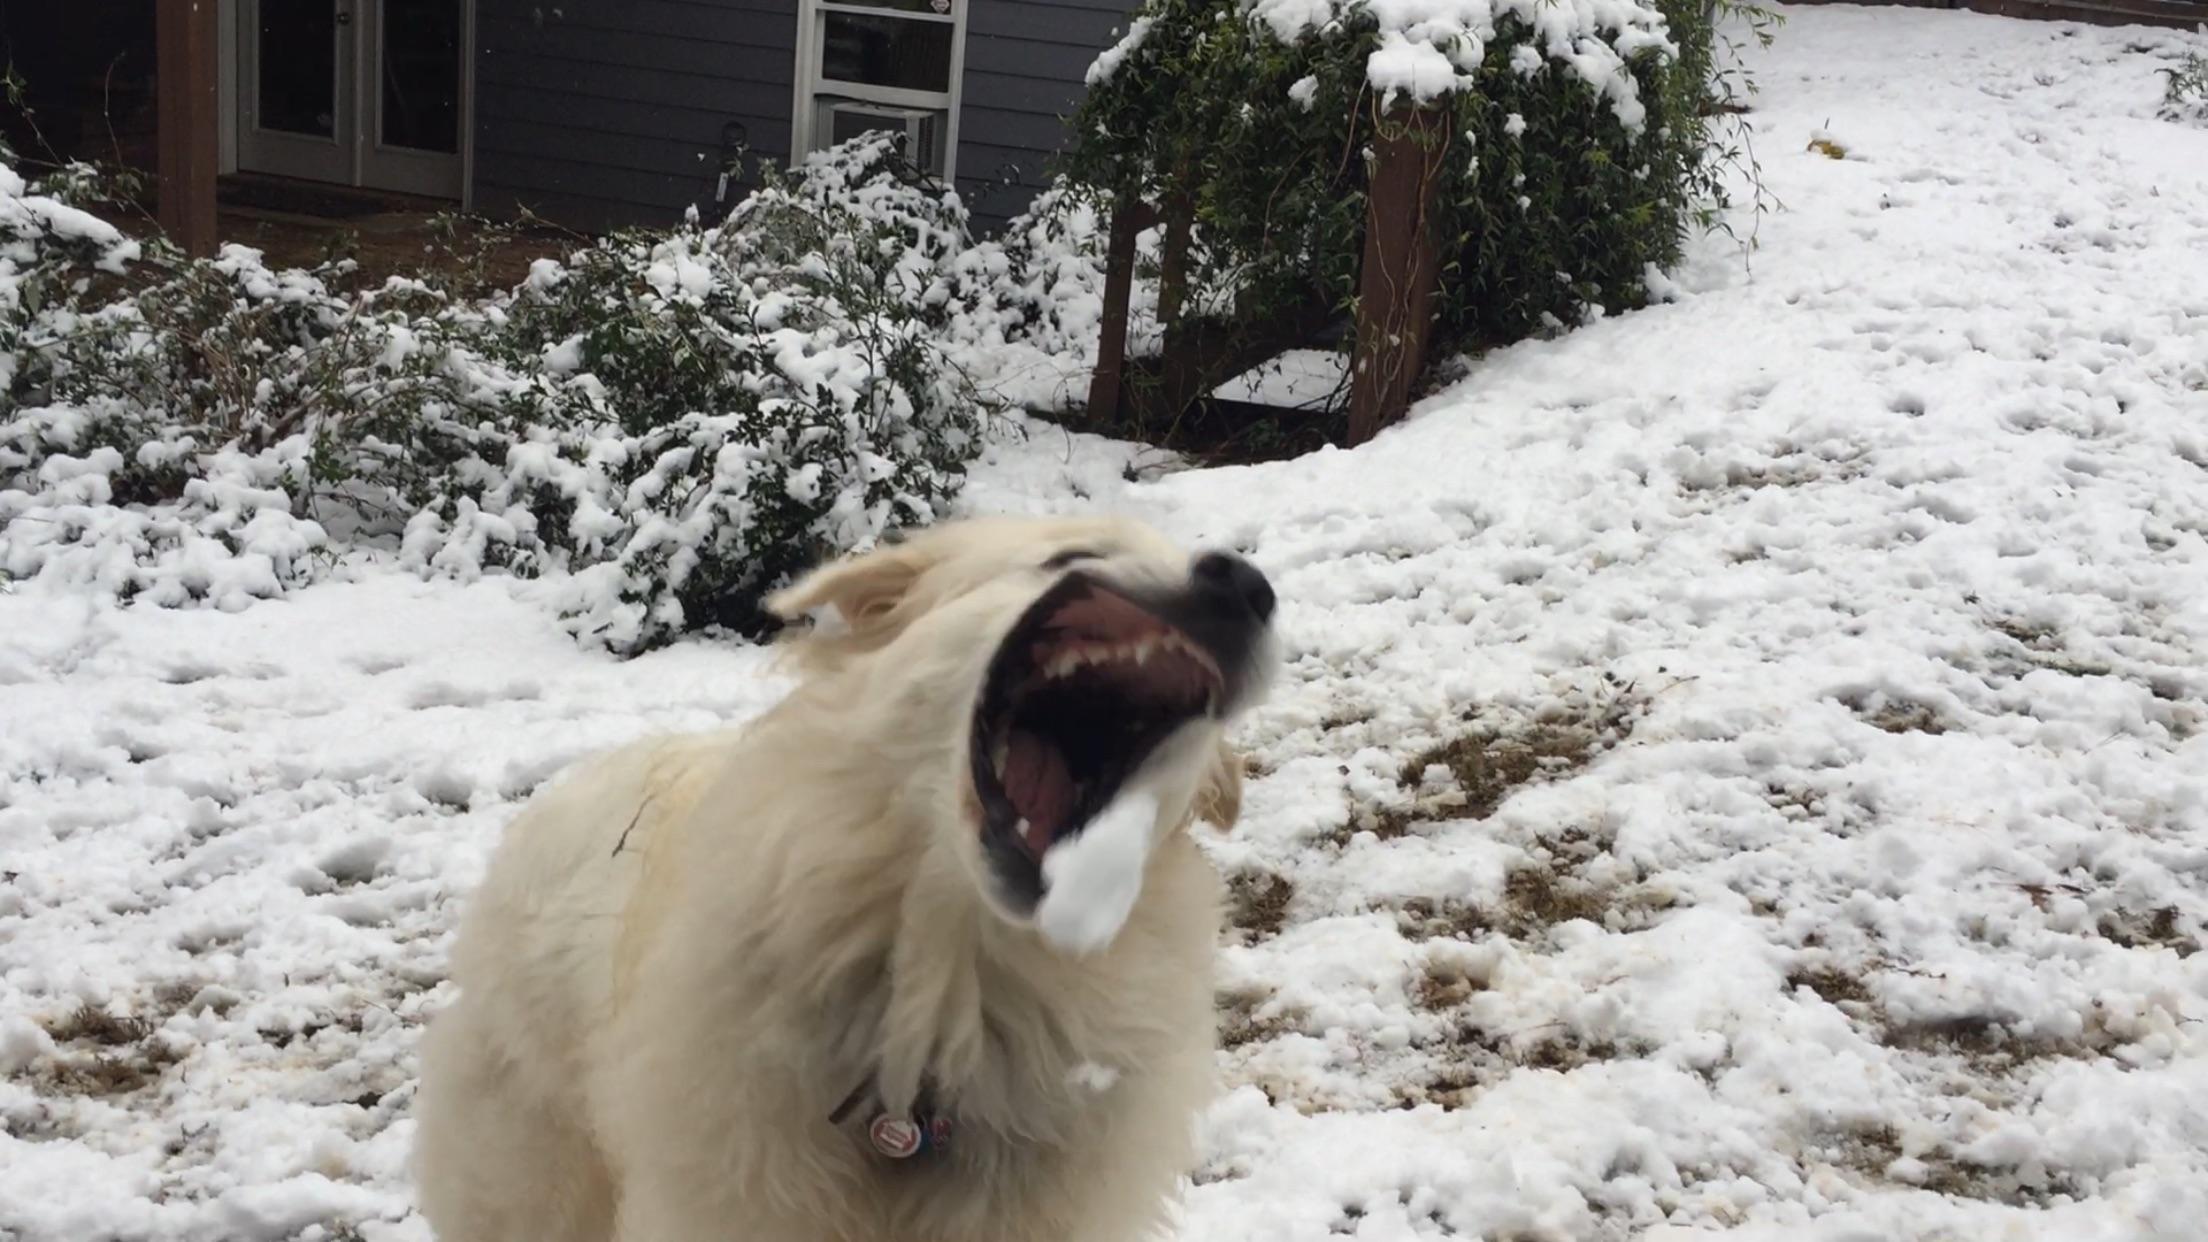 My dog was very enthusiastic about the snow today : aww